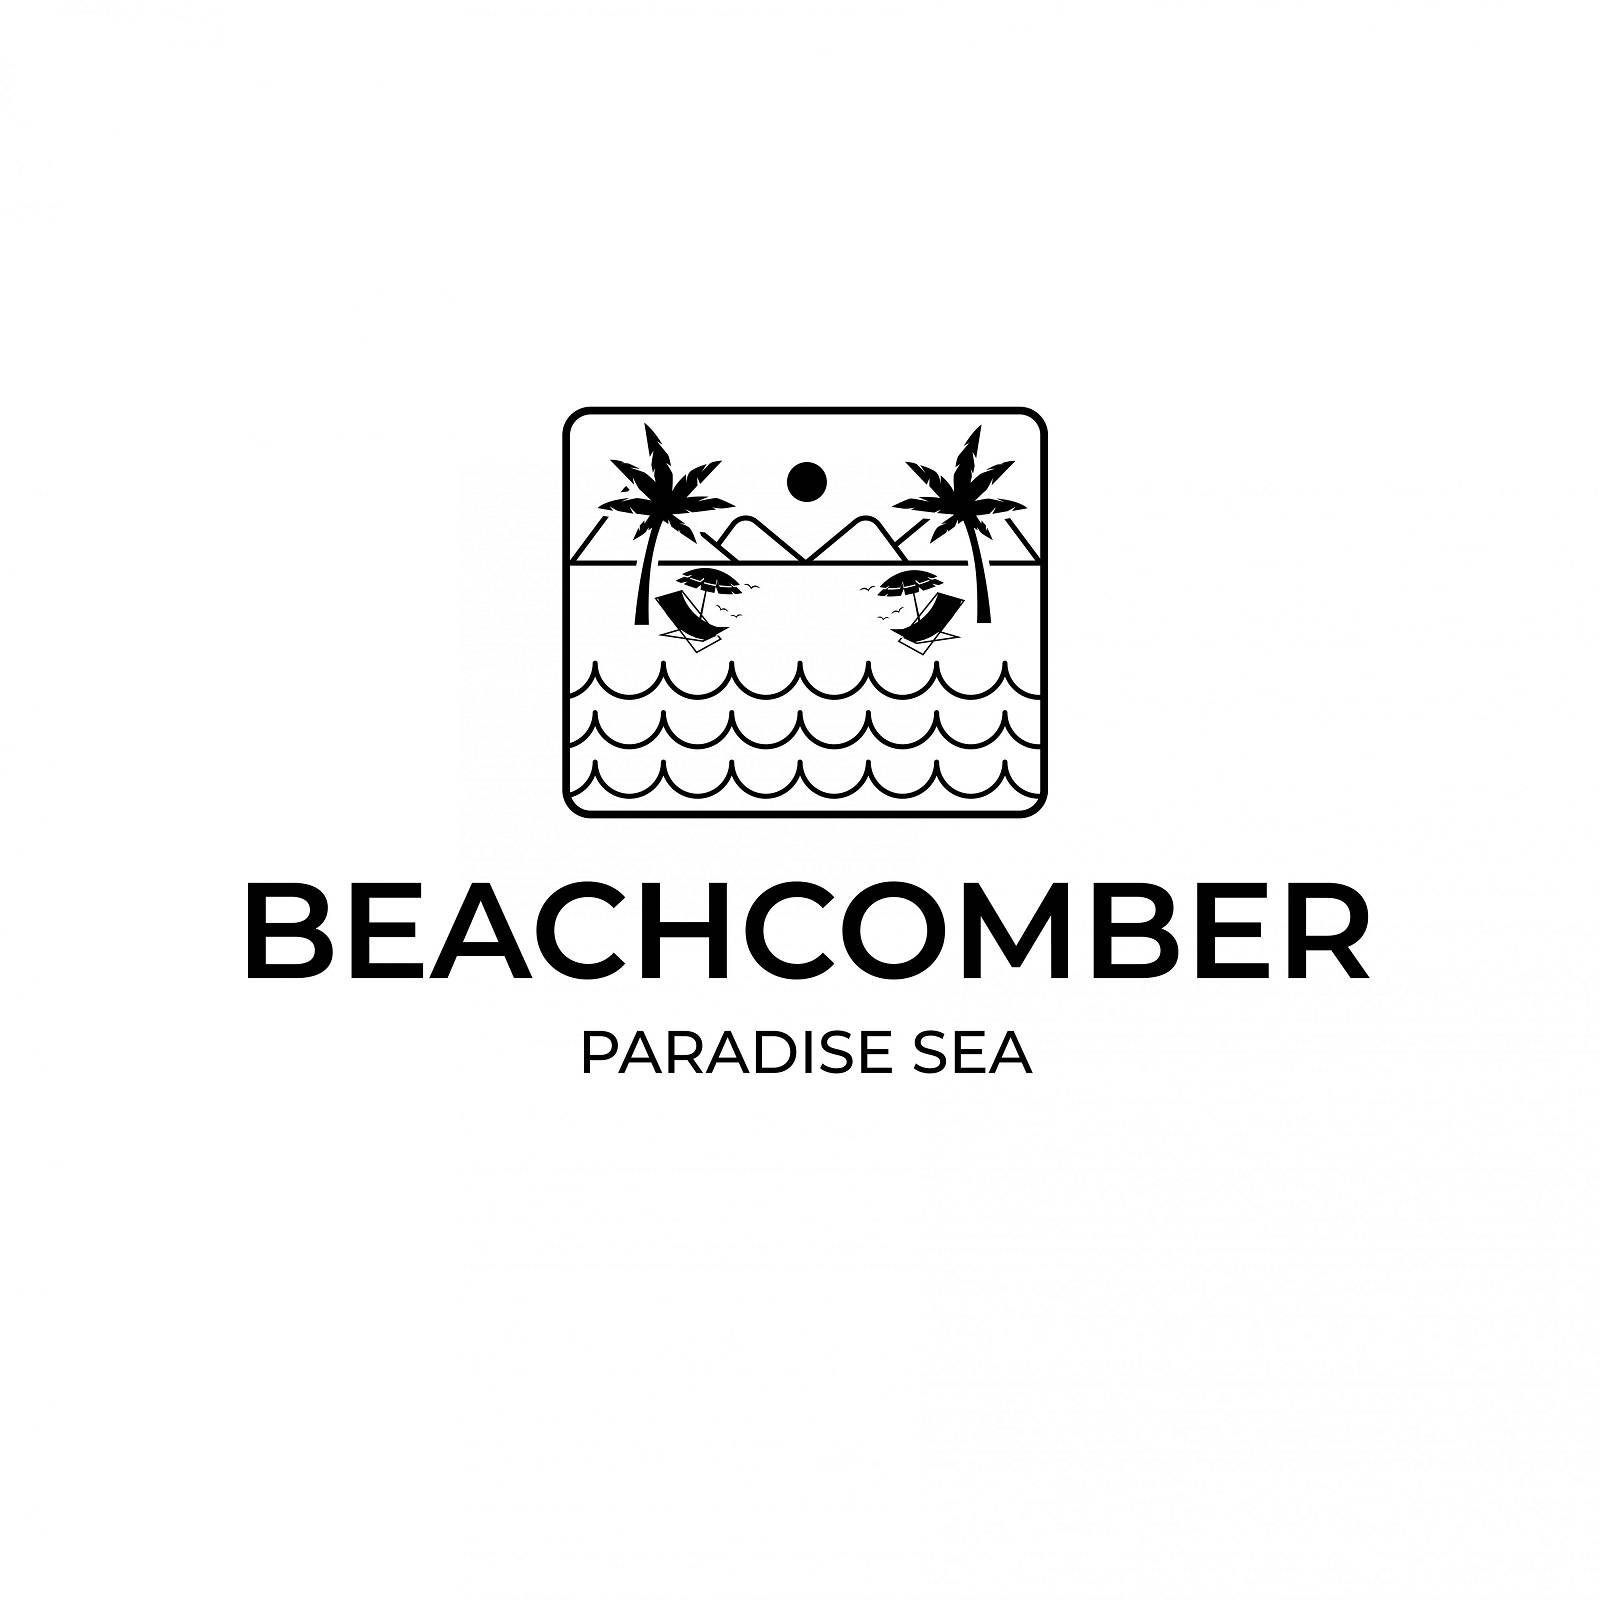 Beach logo with trees and mountains